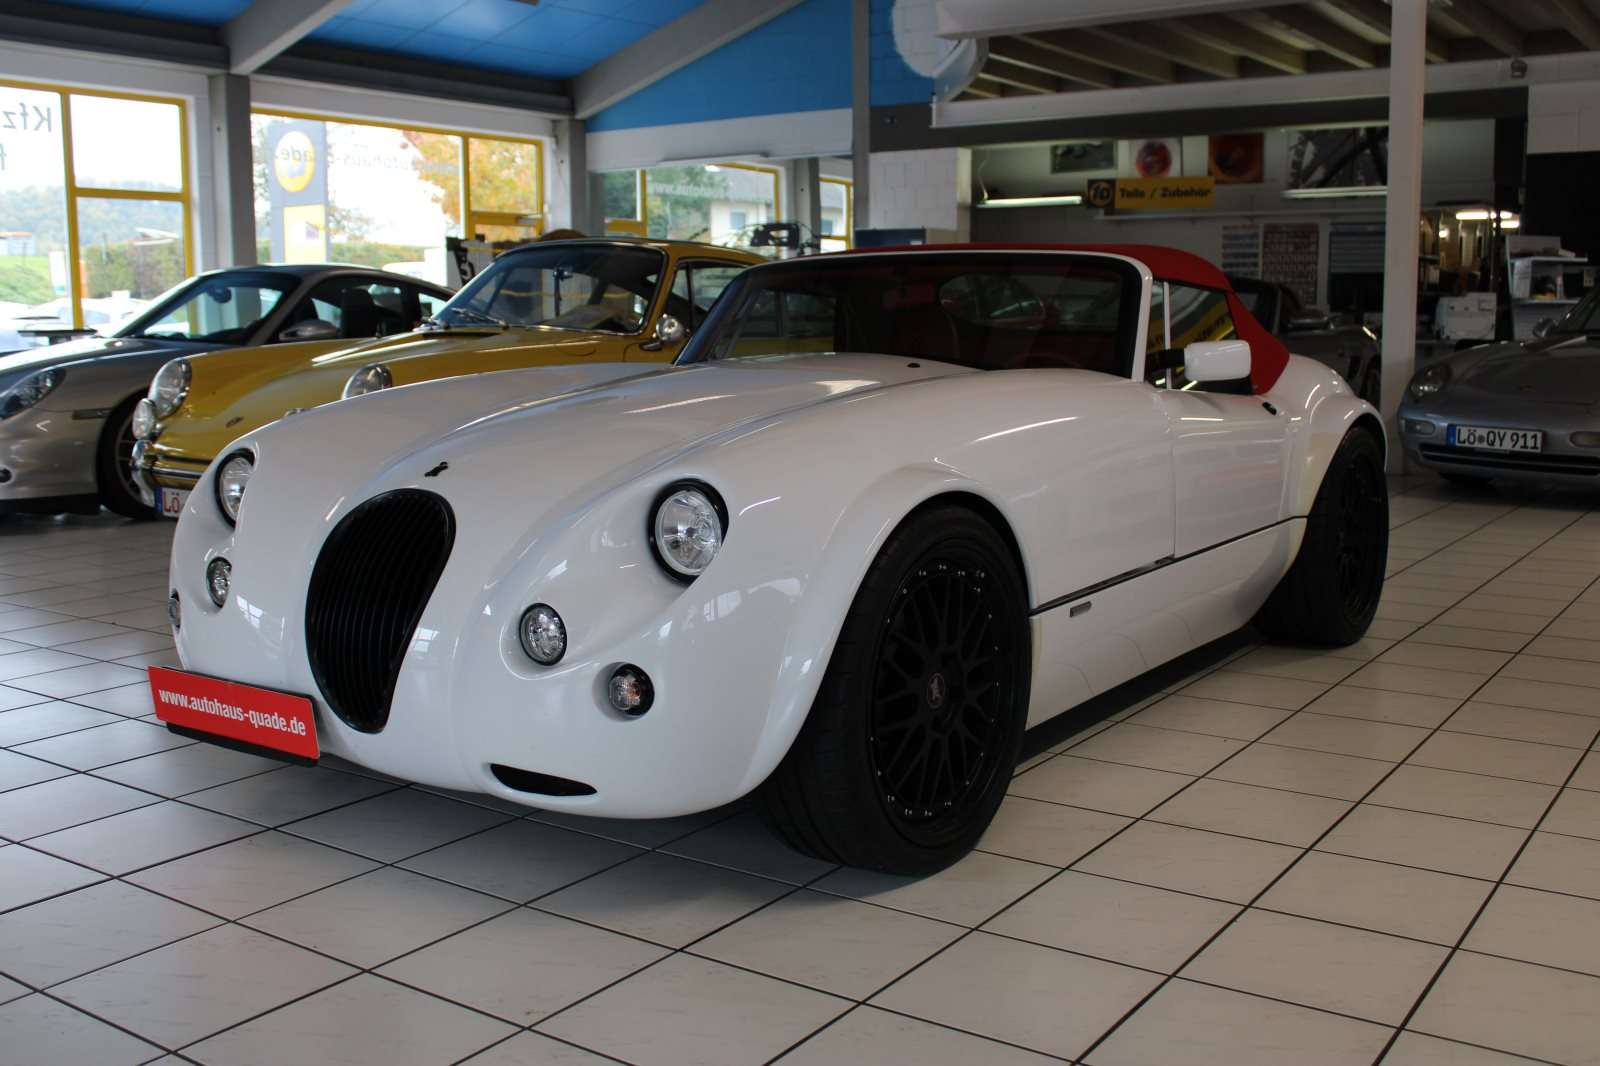 Wiesmann MF 3 Convertible in White used in Kandern for € 160,000.-